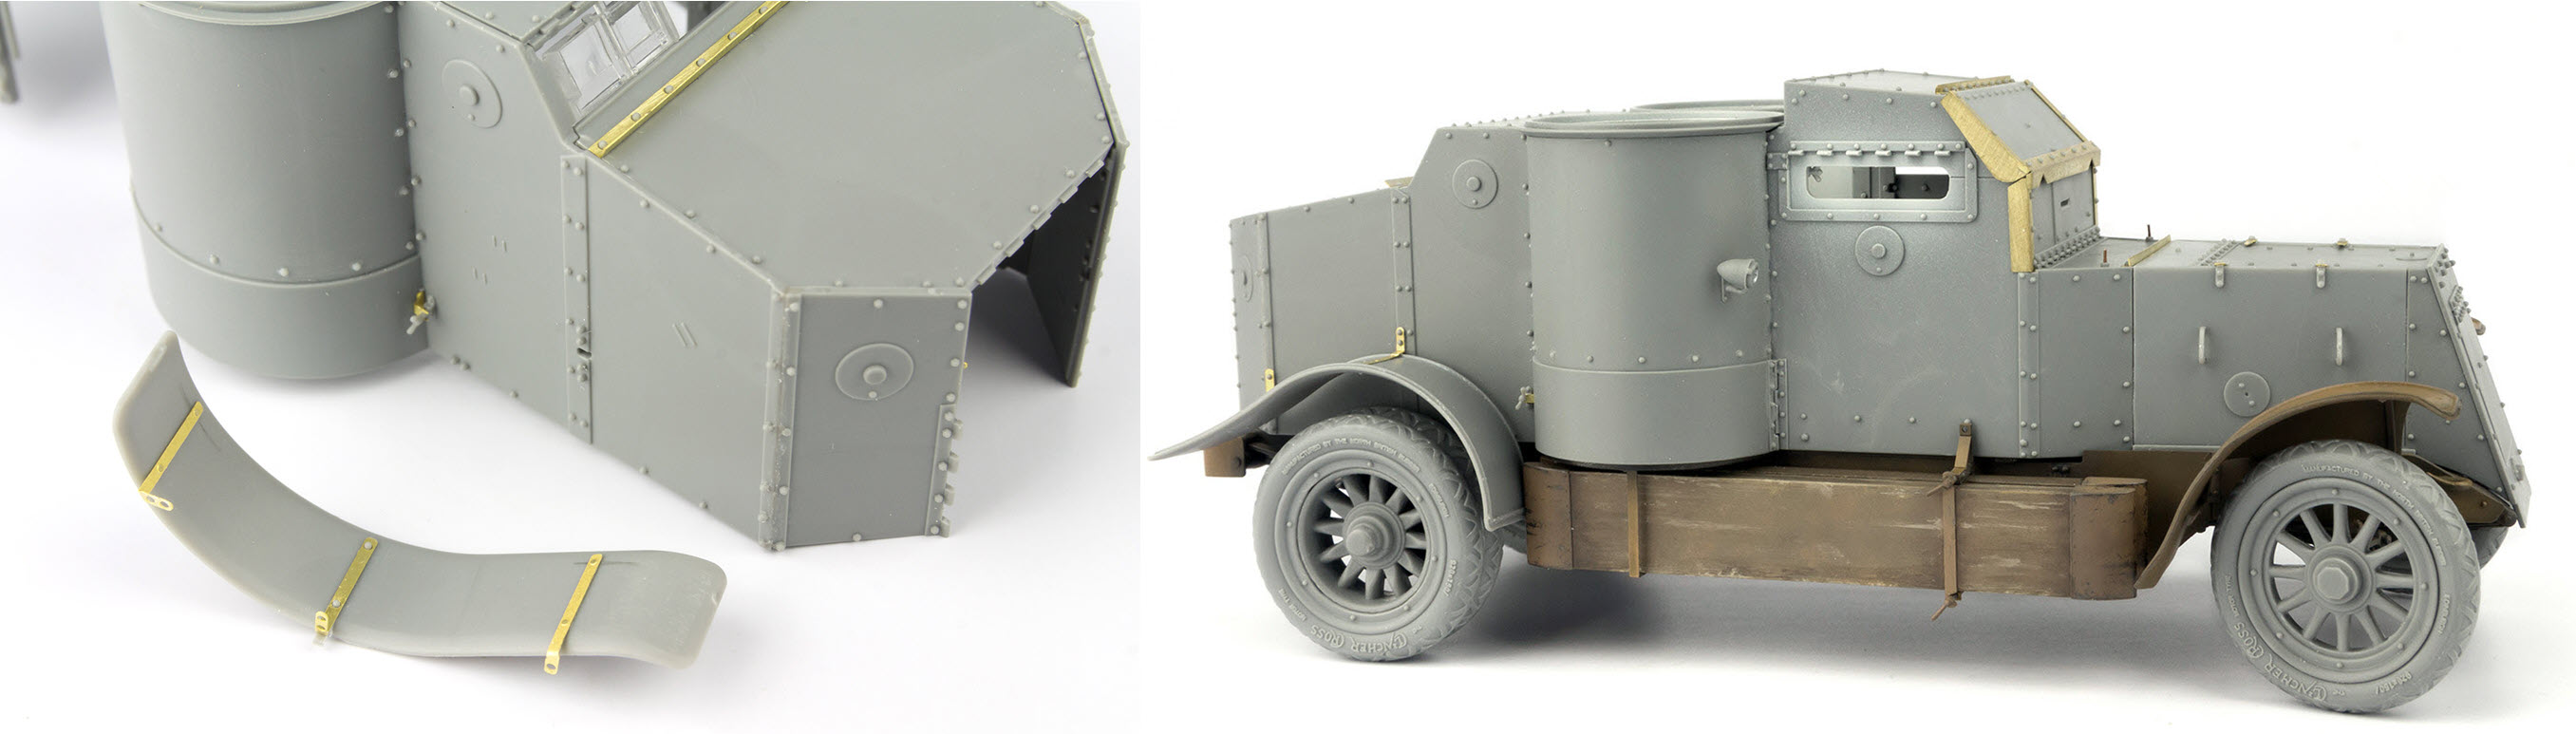 MiniArt 1/35 Scale Wwi/ii British Austin Armored Car 3rd Series Kit 39005 for sale online 